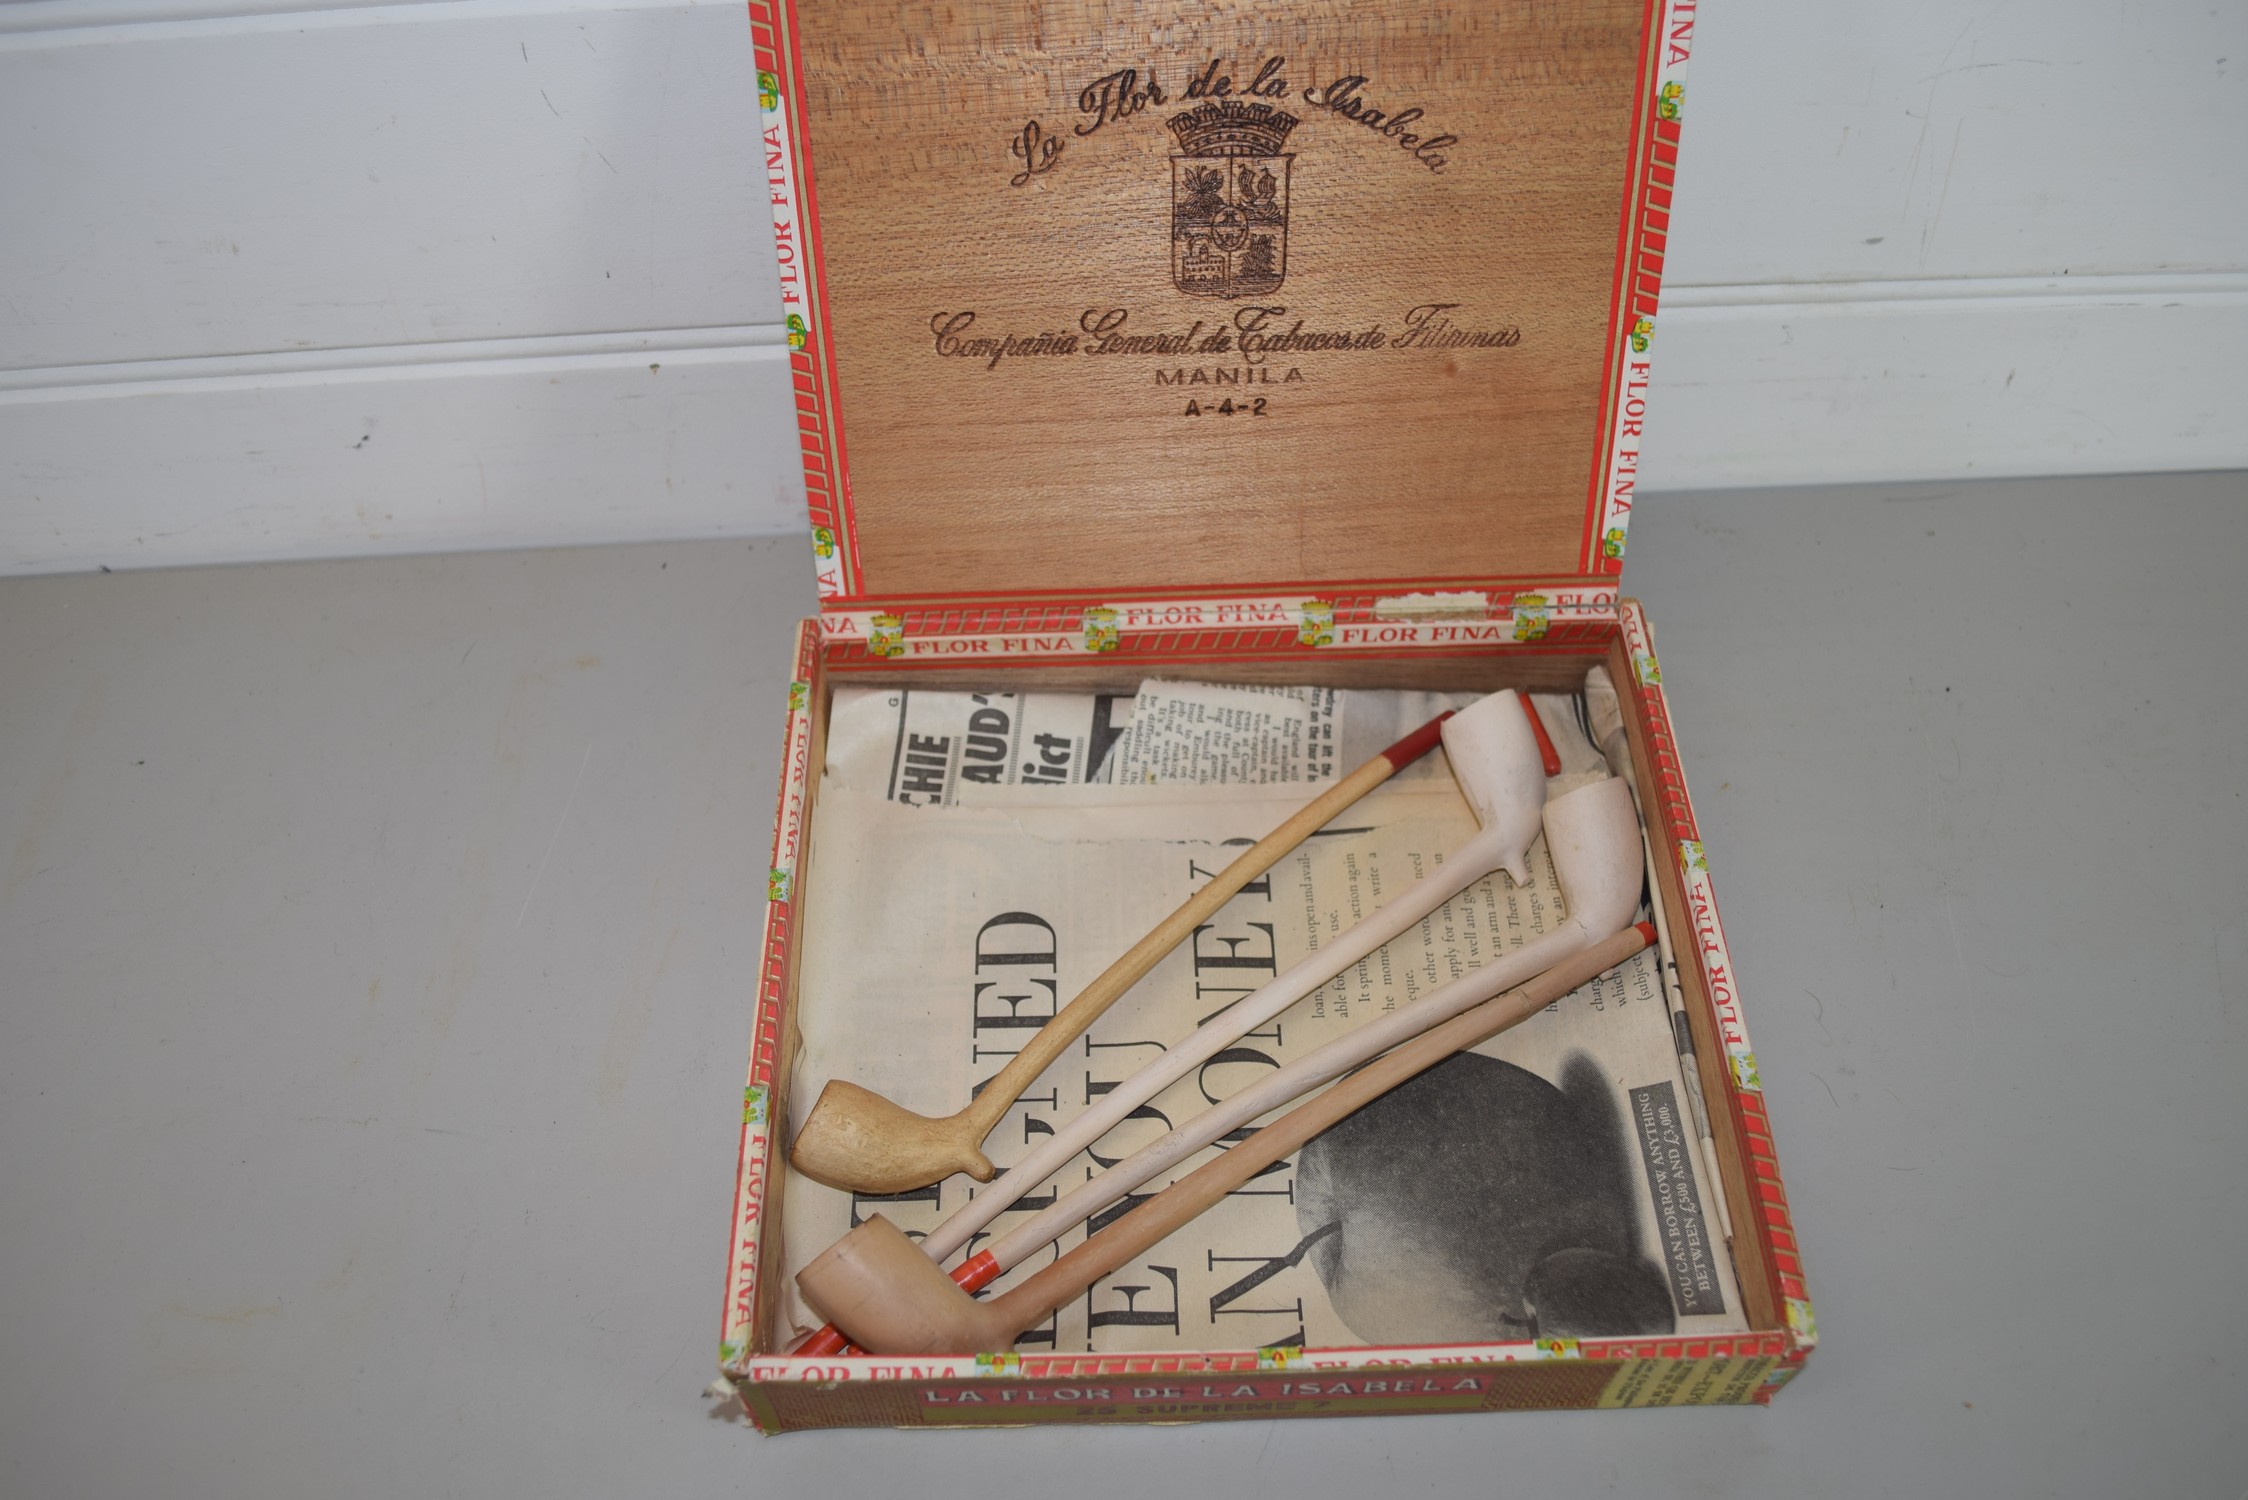 OLD CIGAR BOX WITH CLAY PIPES - Image 2 of 2